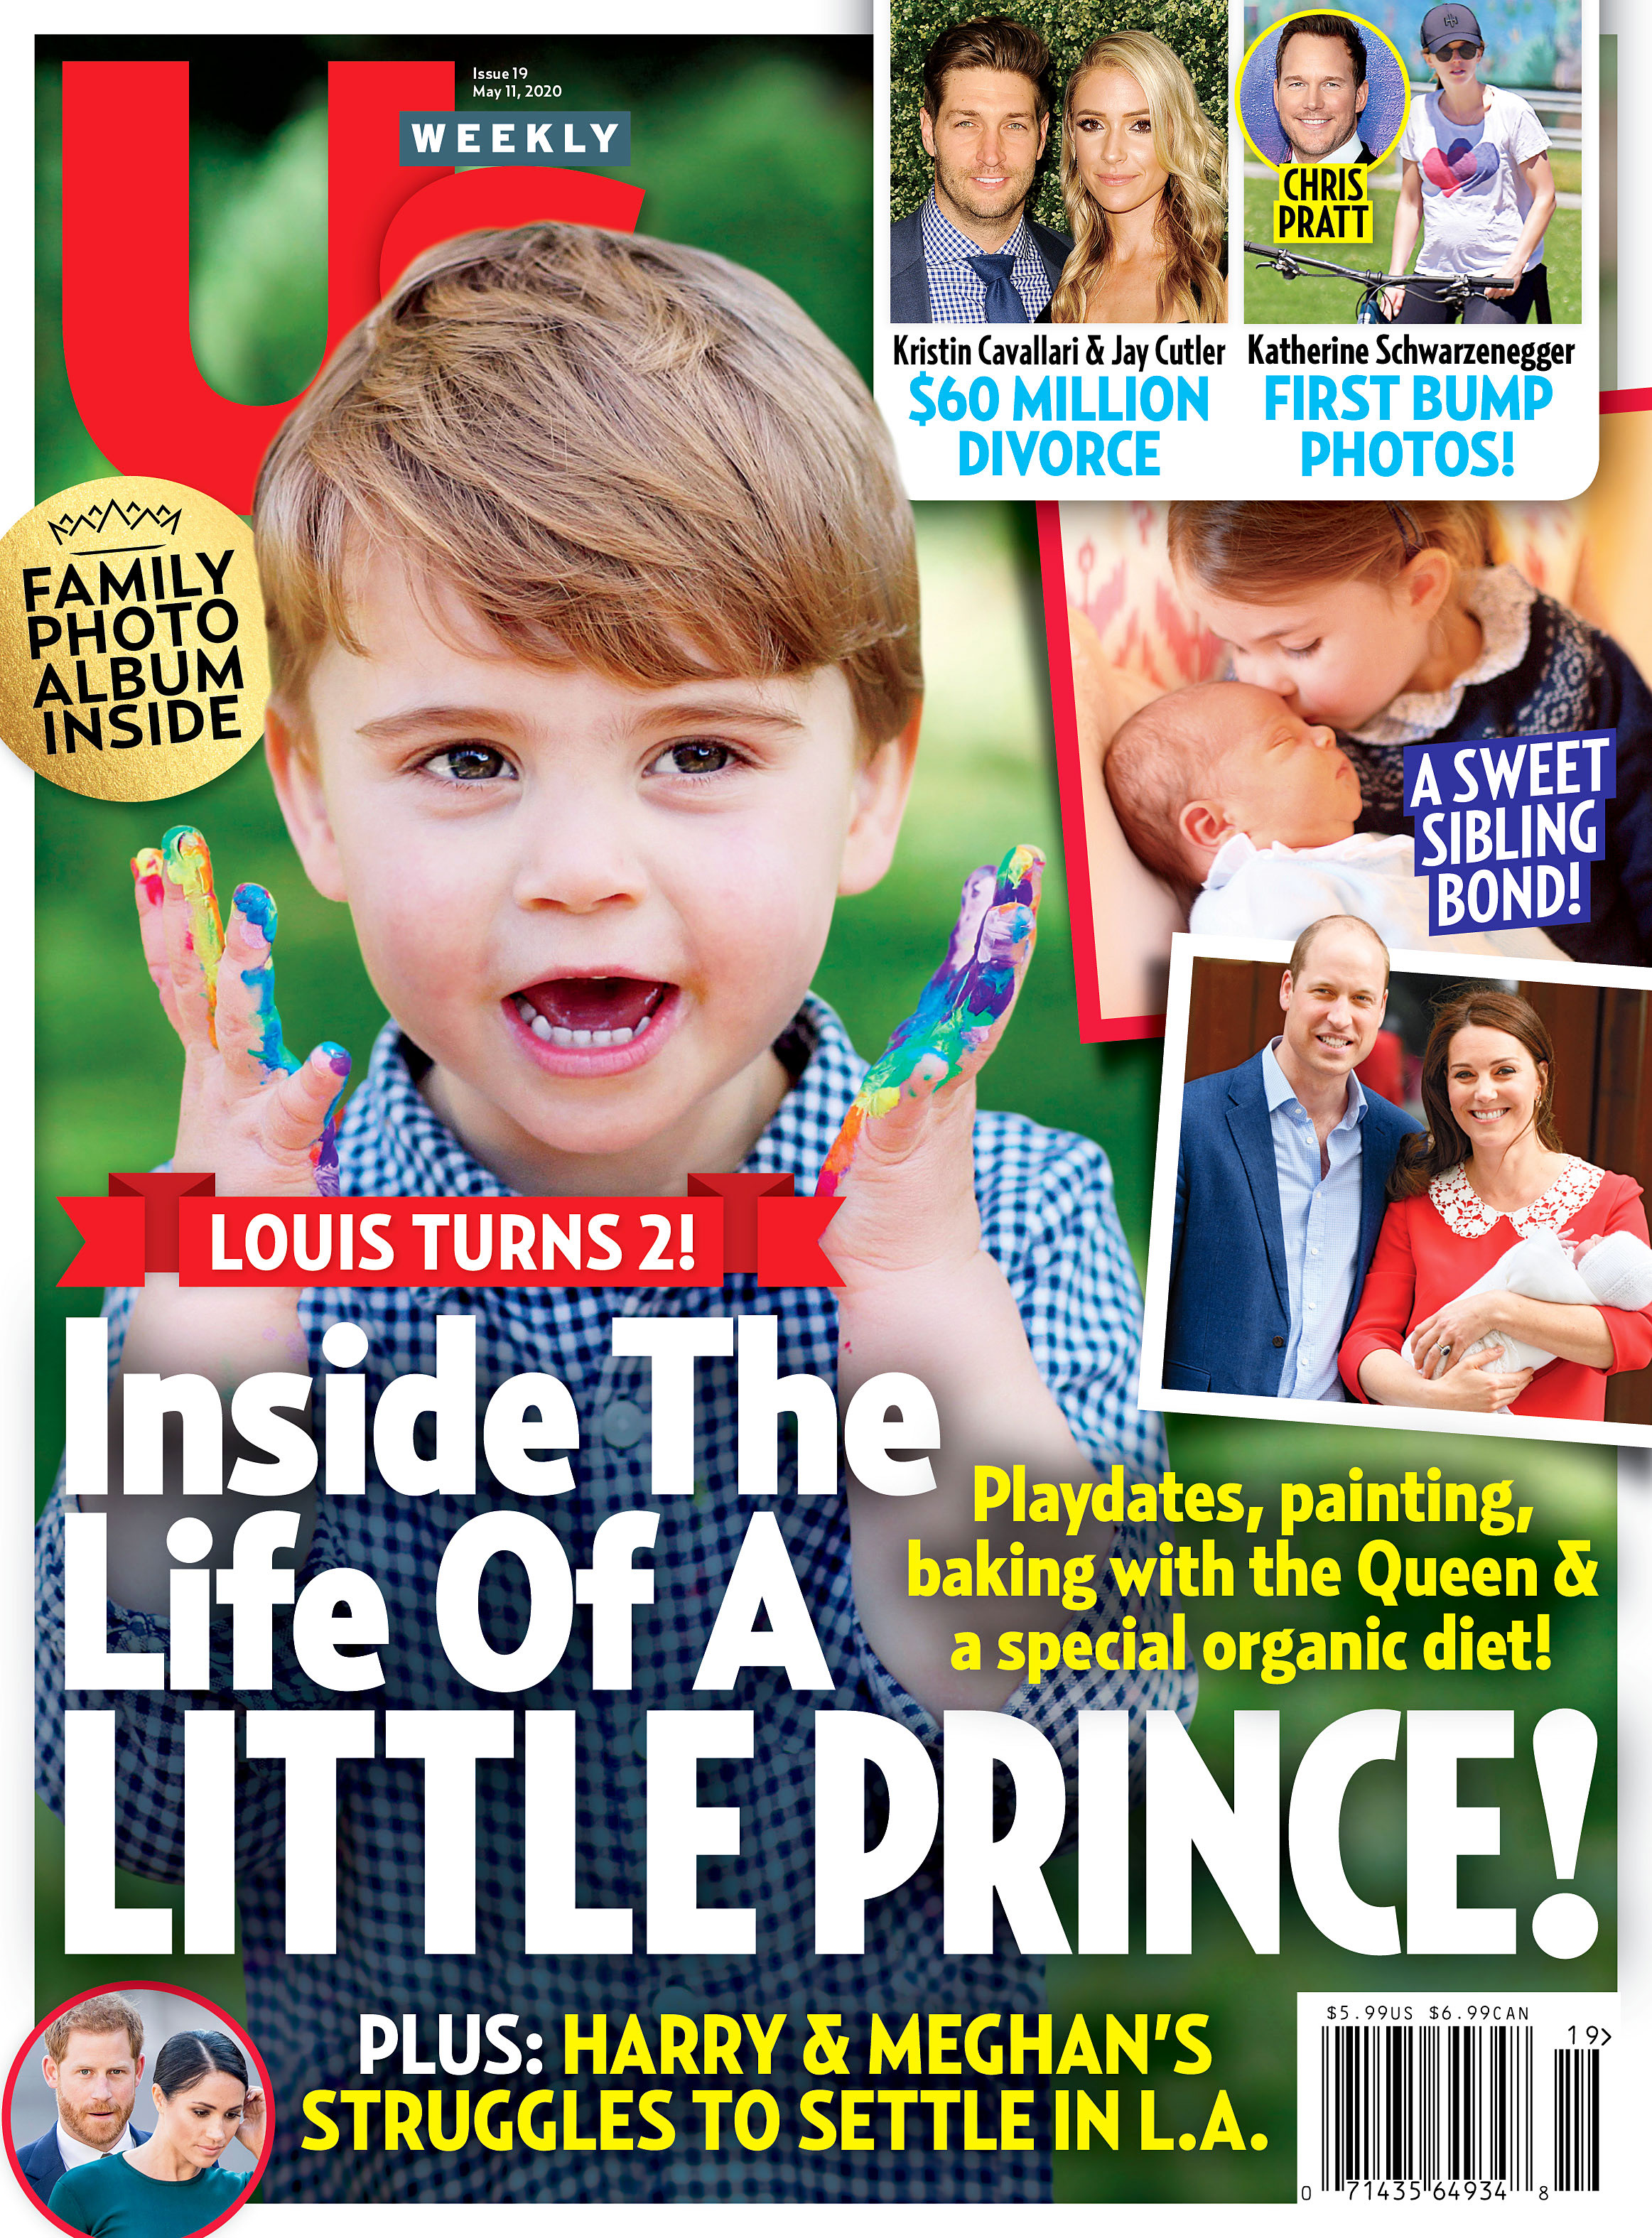 Us Weekly Cover Issue 19 Prince Louis Turns 2